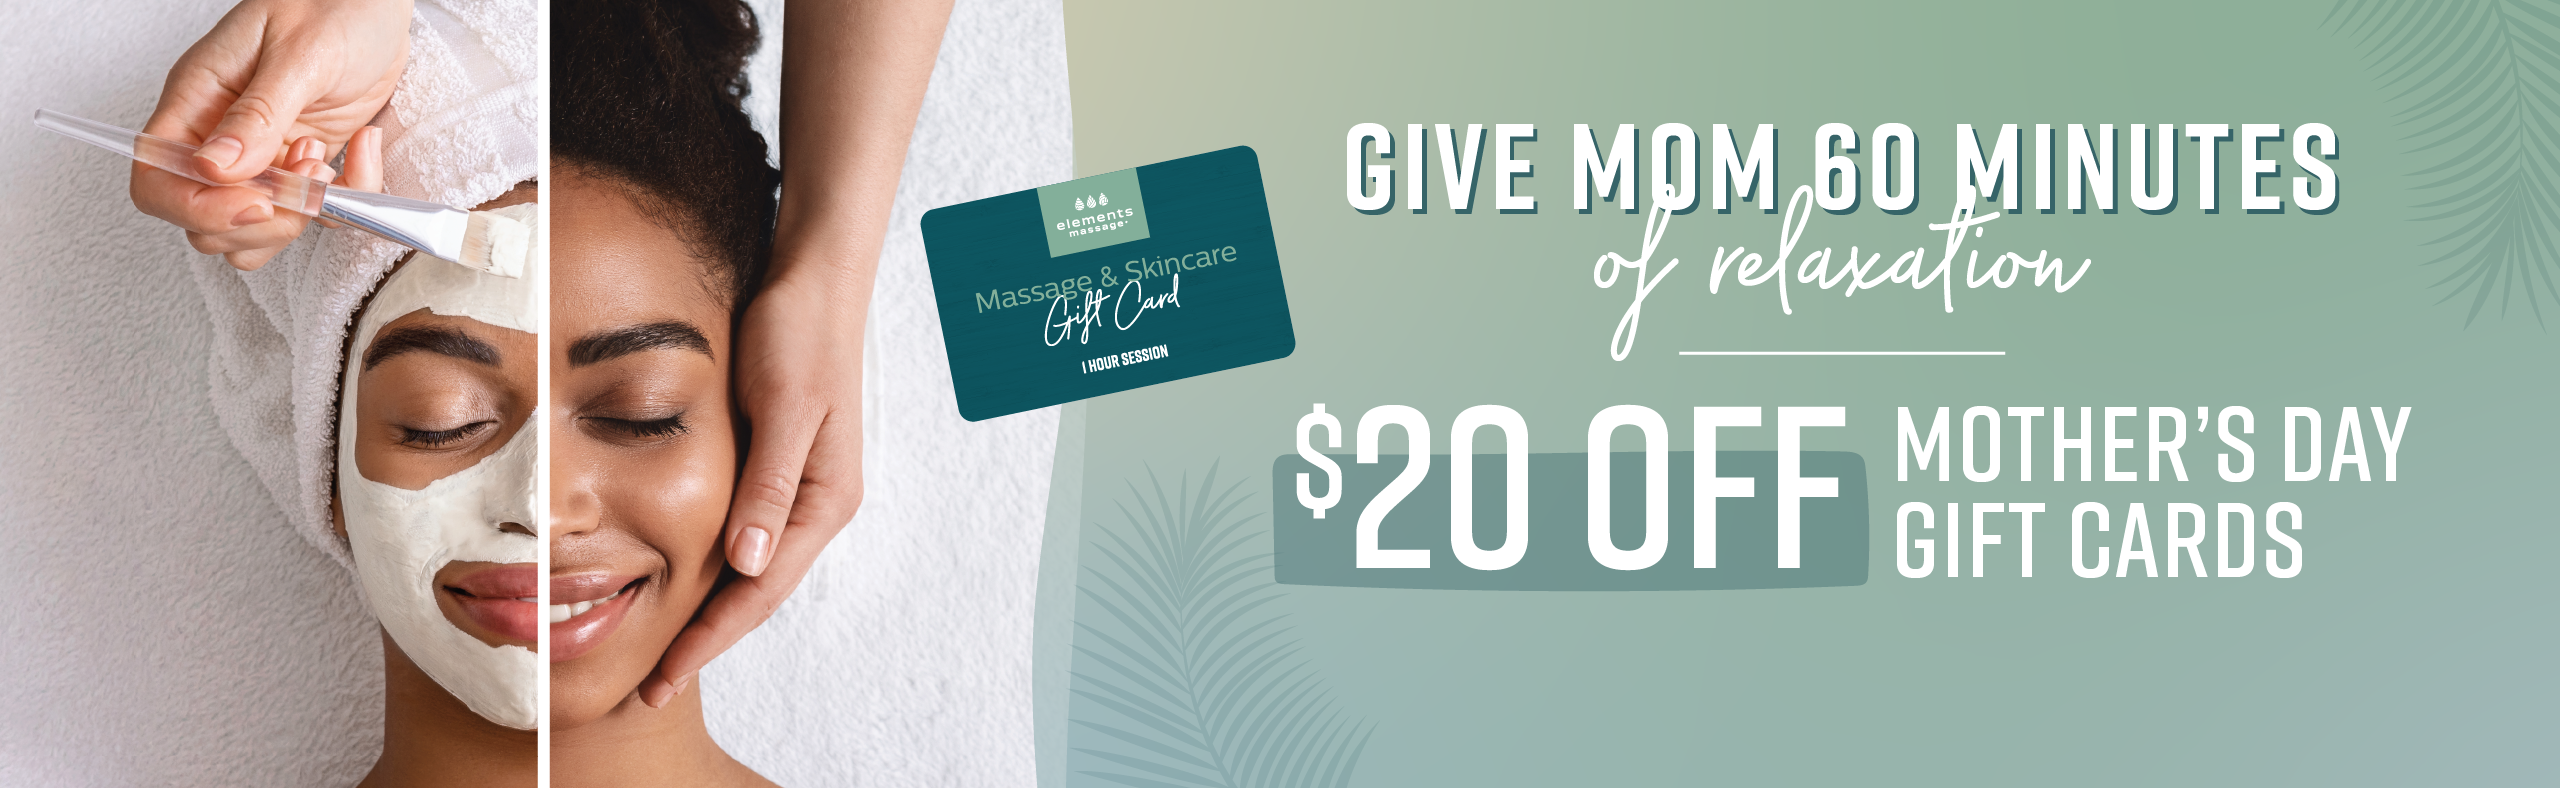 Mother's Day gift card offer